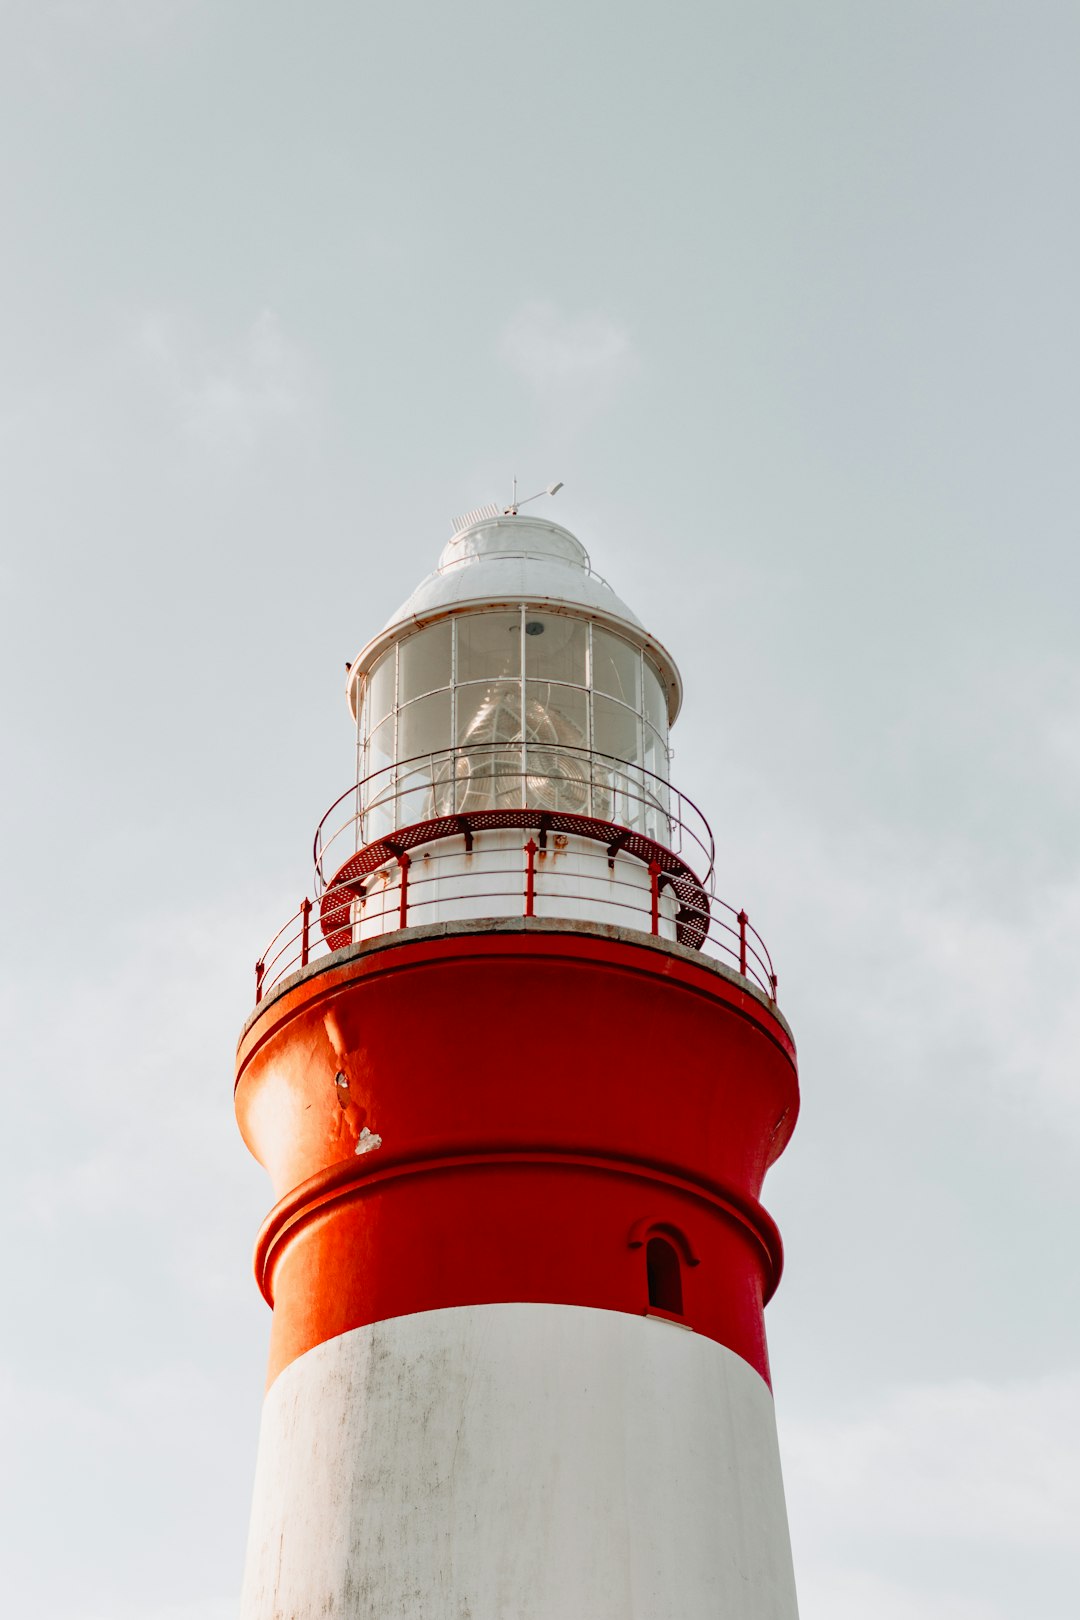 travelers stories about Lighthouse in L'Agulhas, South Africa